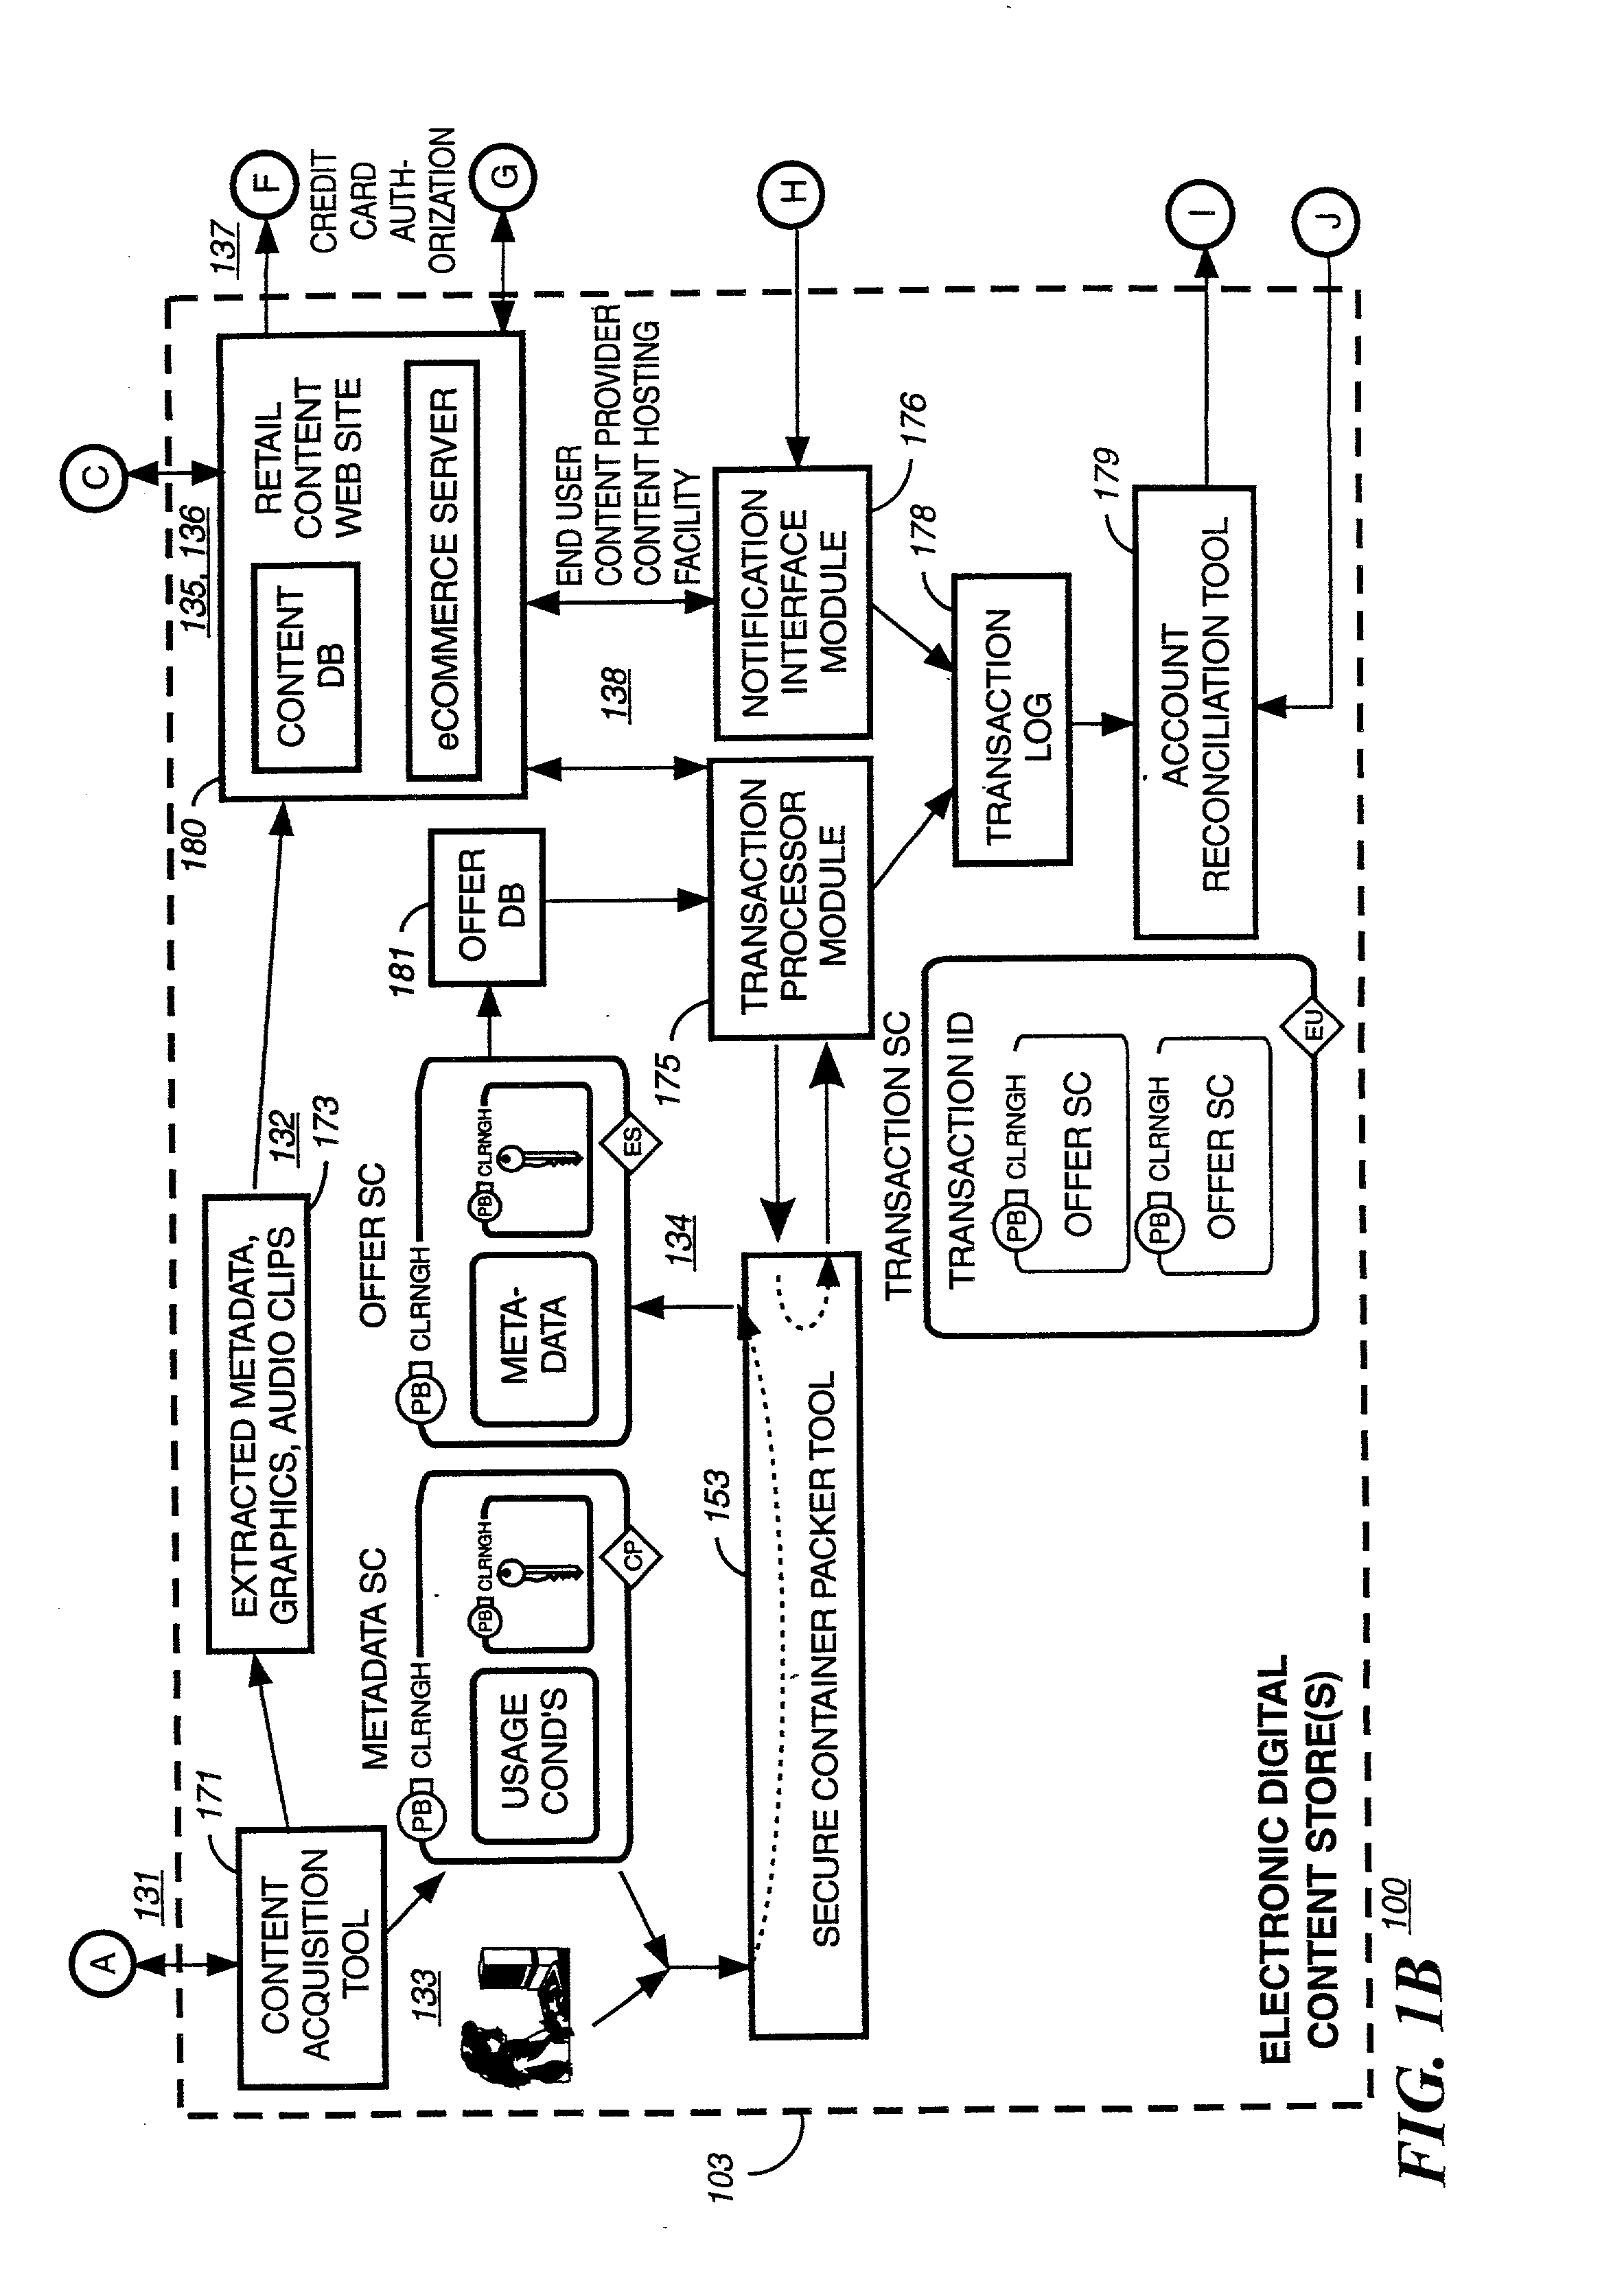 Method and system of preventing unauthorized rerecording of multimedia content